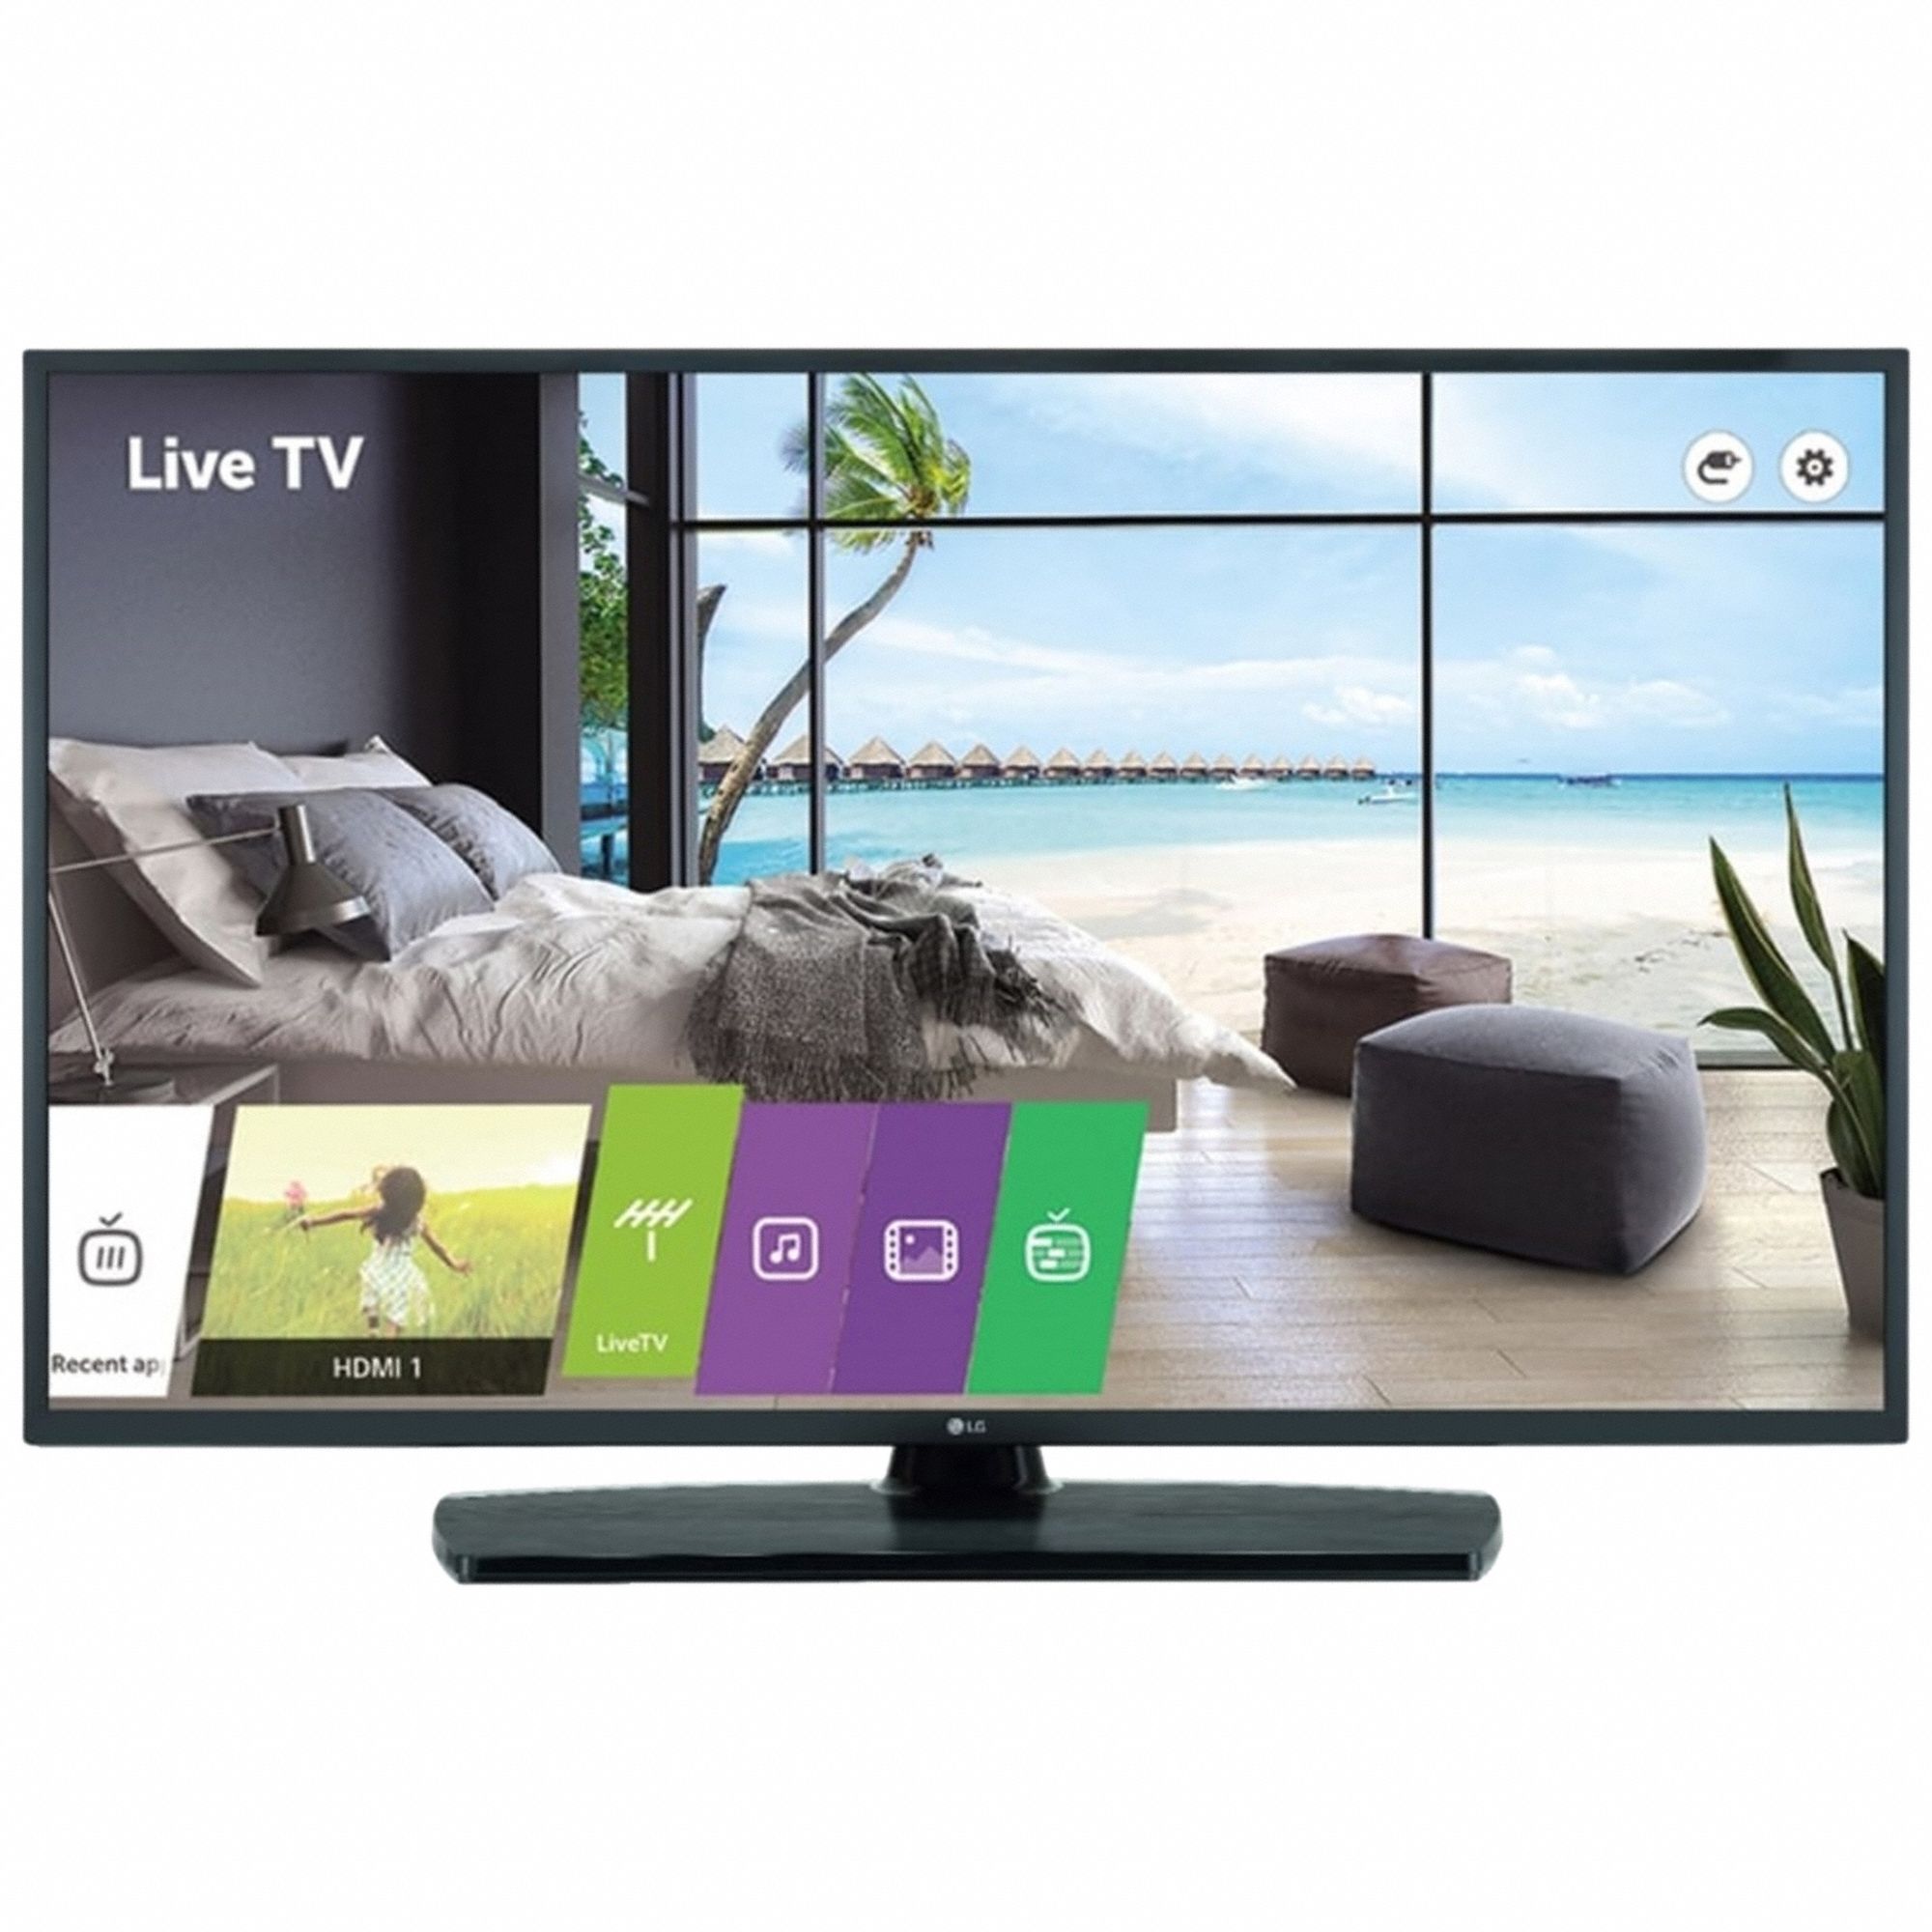 Hospitality/Healthcare UHD TV: 43 in HDTV Screen Size, 2160, 60 Hz Screen Refresh Rate, LED